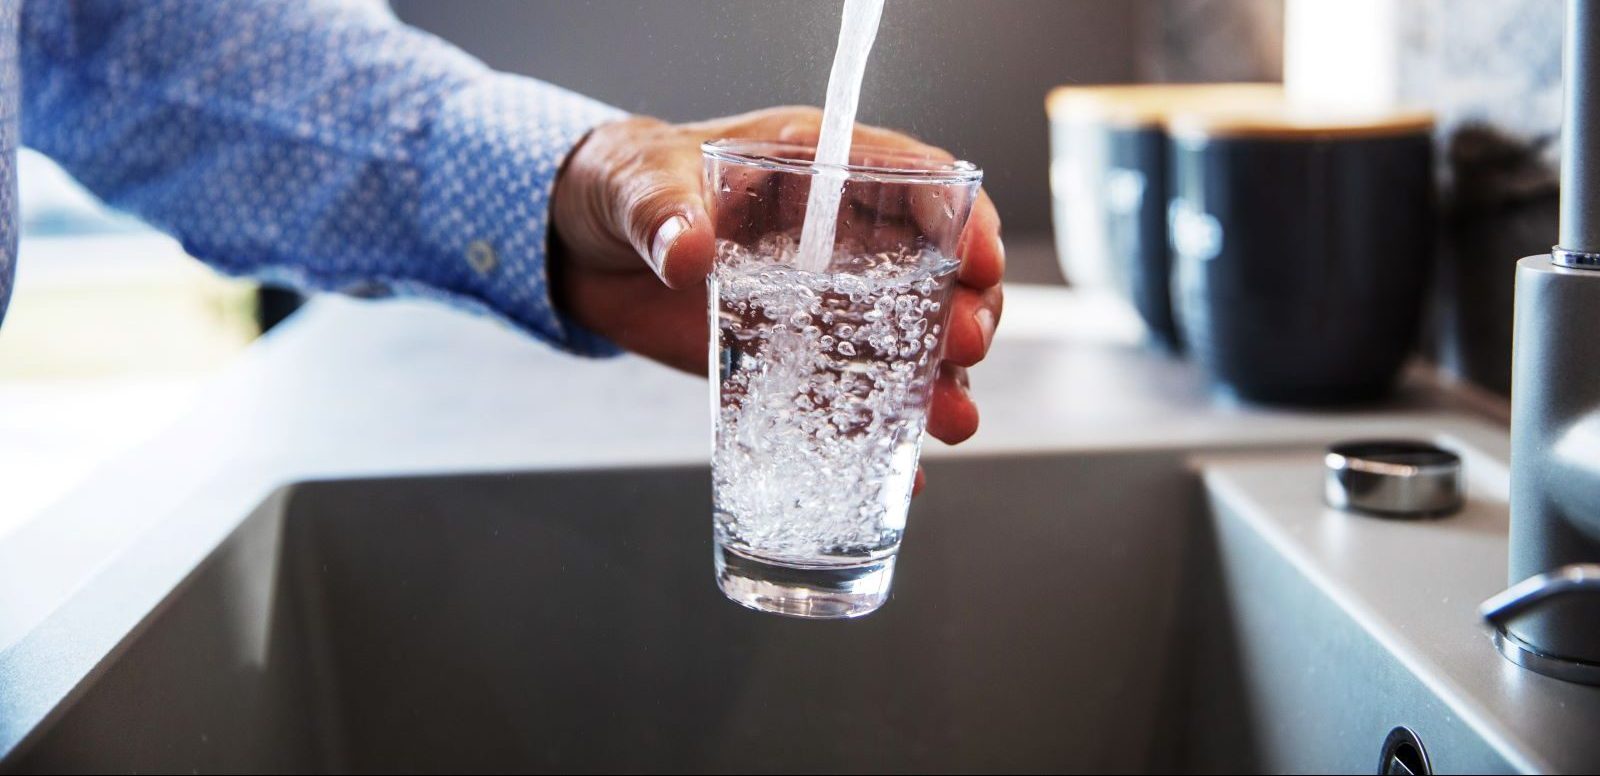 Could Hydration Slow Aging and Reduce Risk of Early Death?